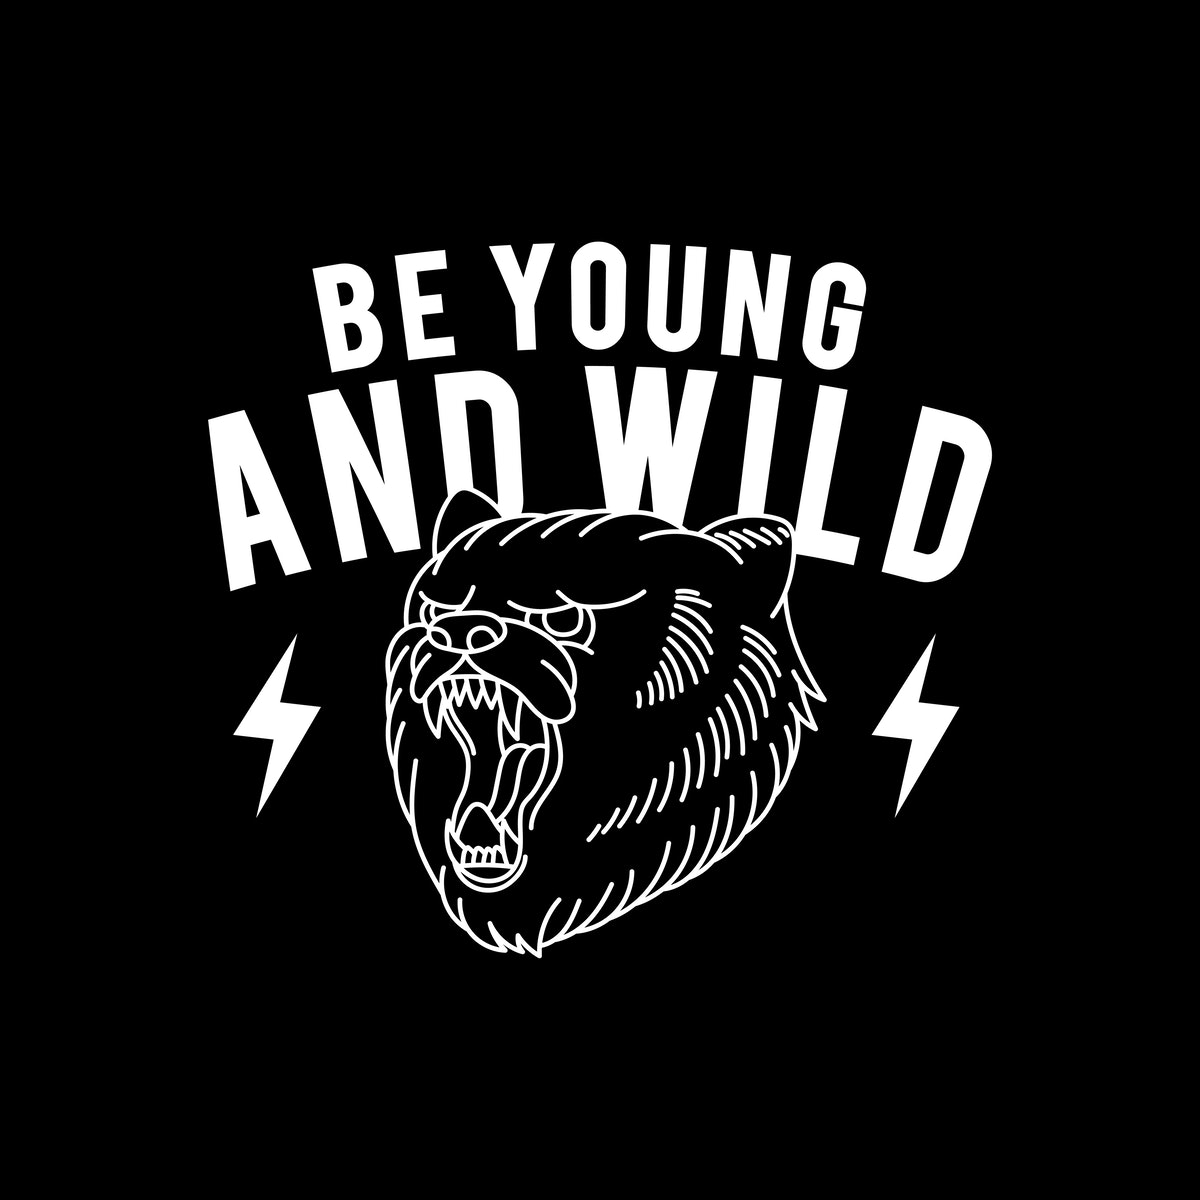 Be young and wild